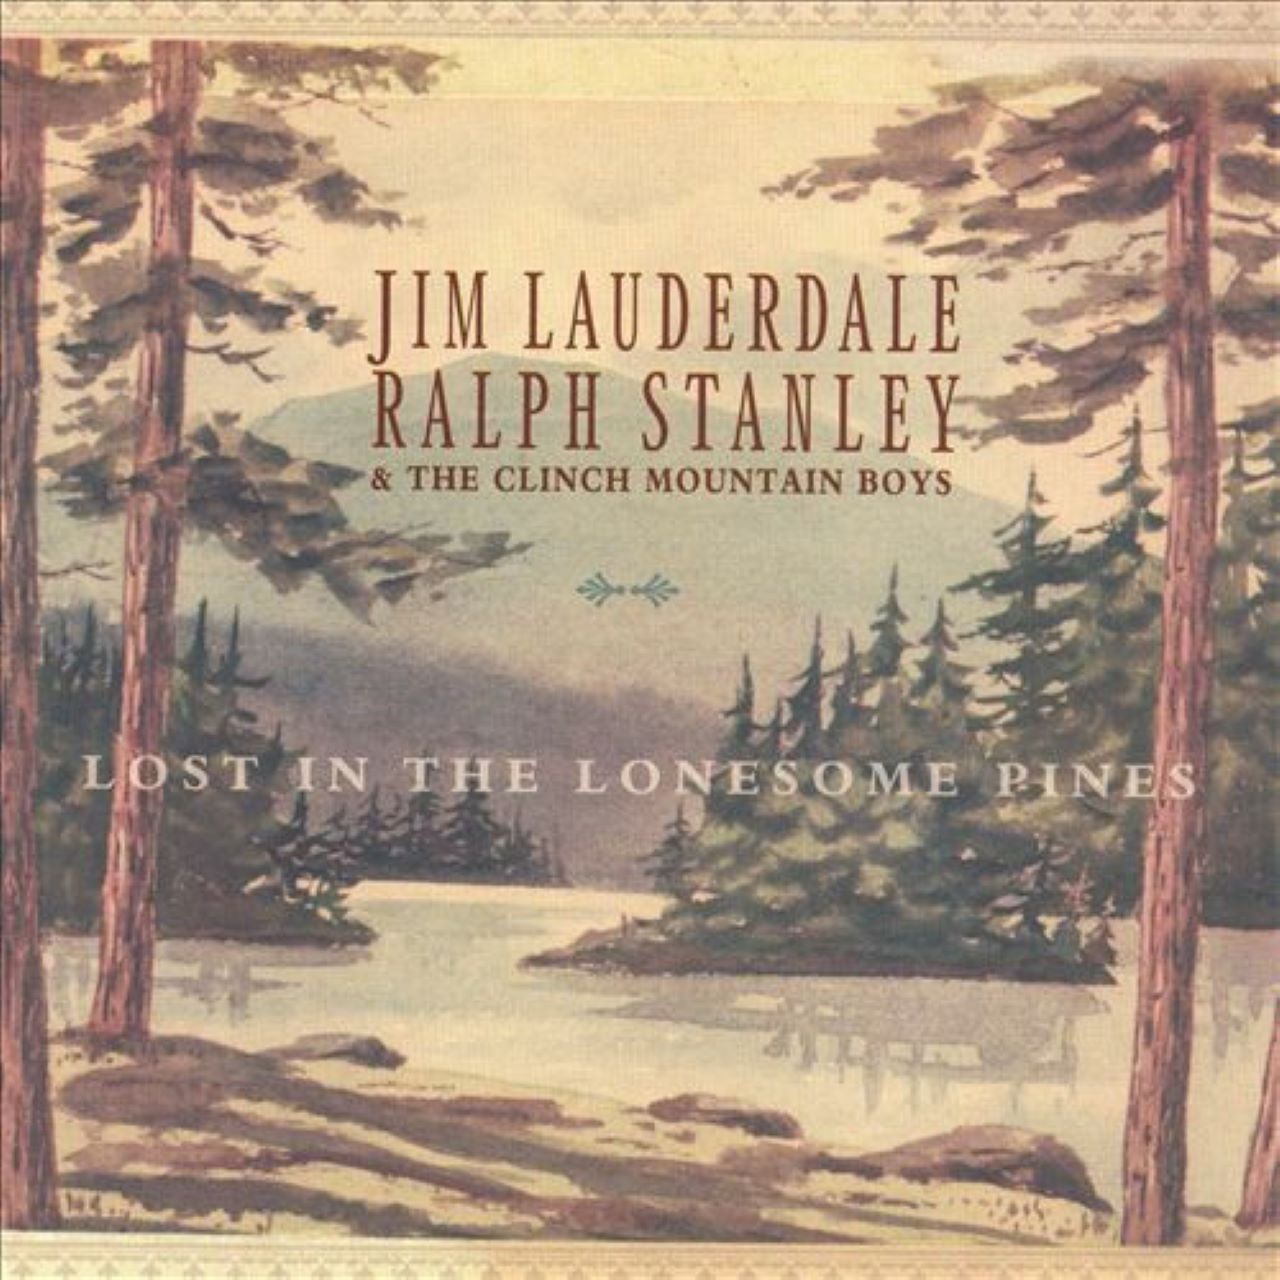 Jim Lauderdale & Ralph Stanley - Lost in The Lonesome Pines cover album